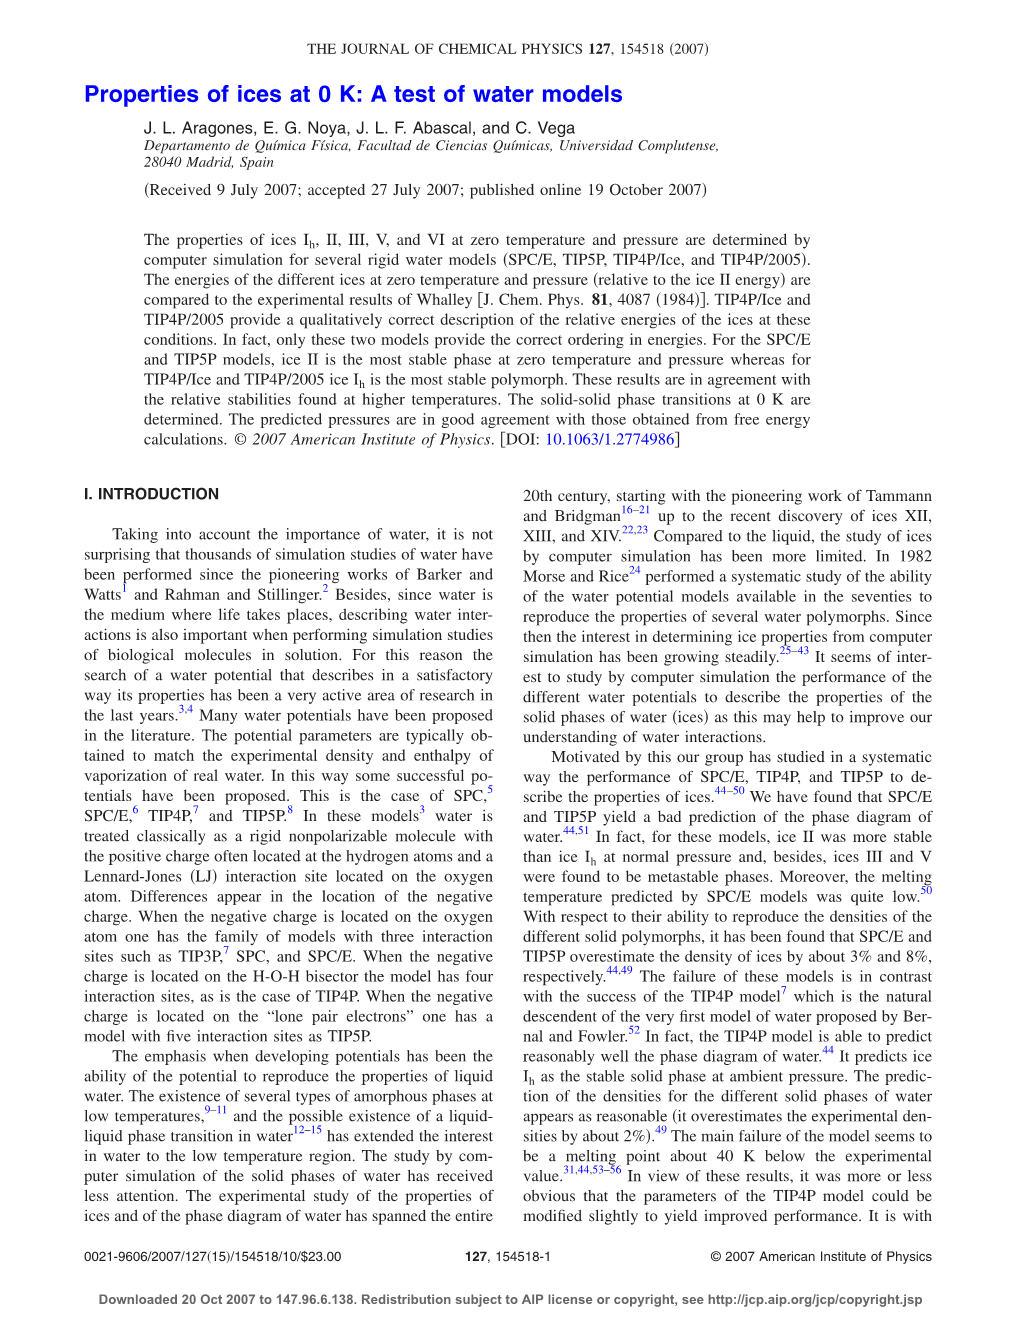 Properties of Ices at 0 K: a Test of Water Models J